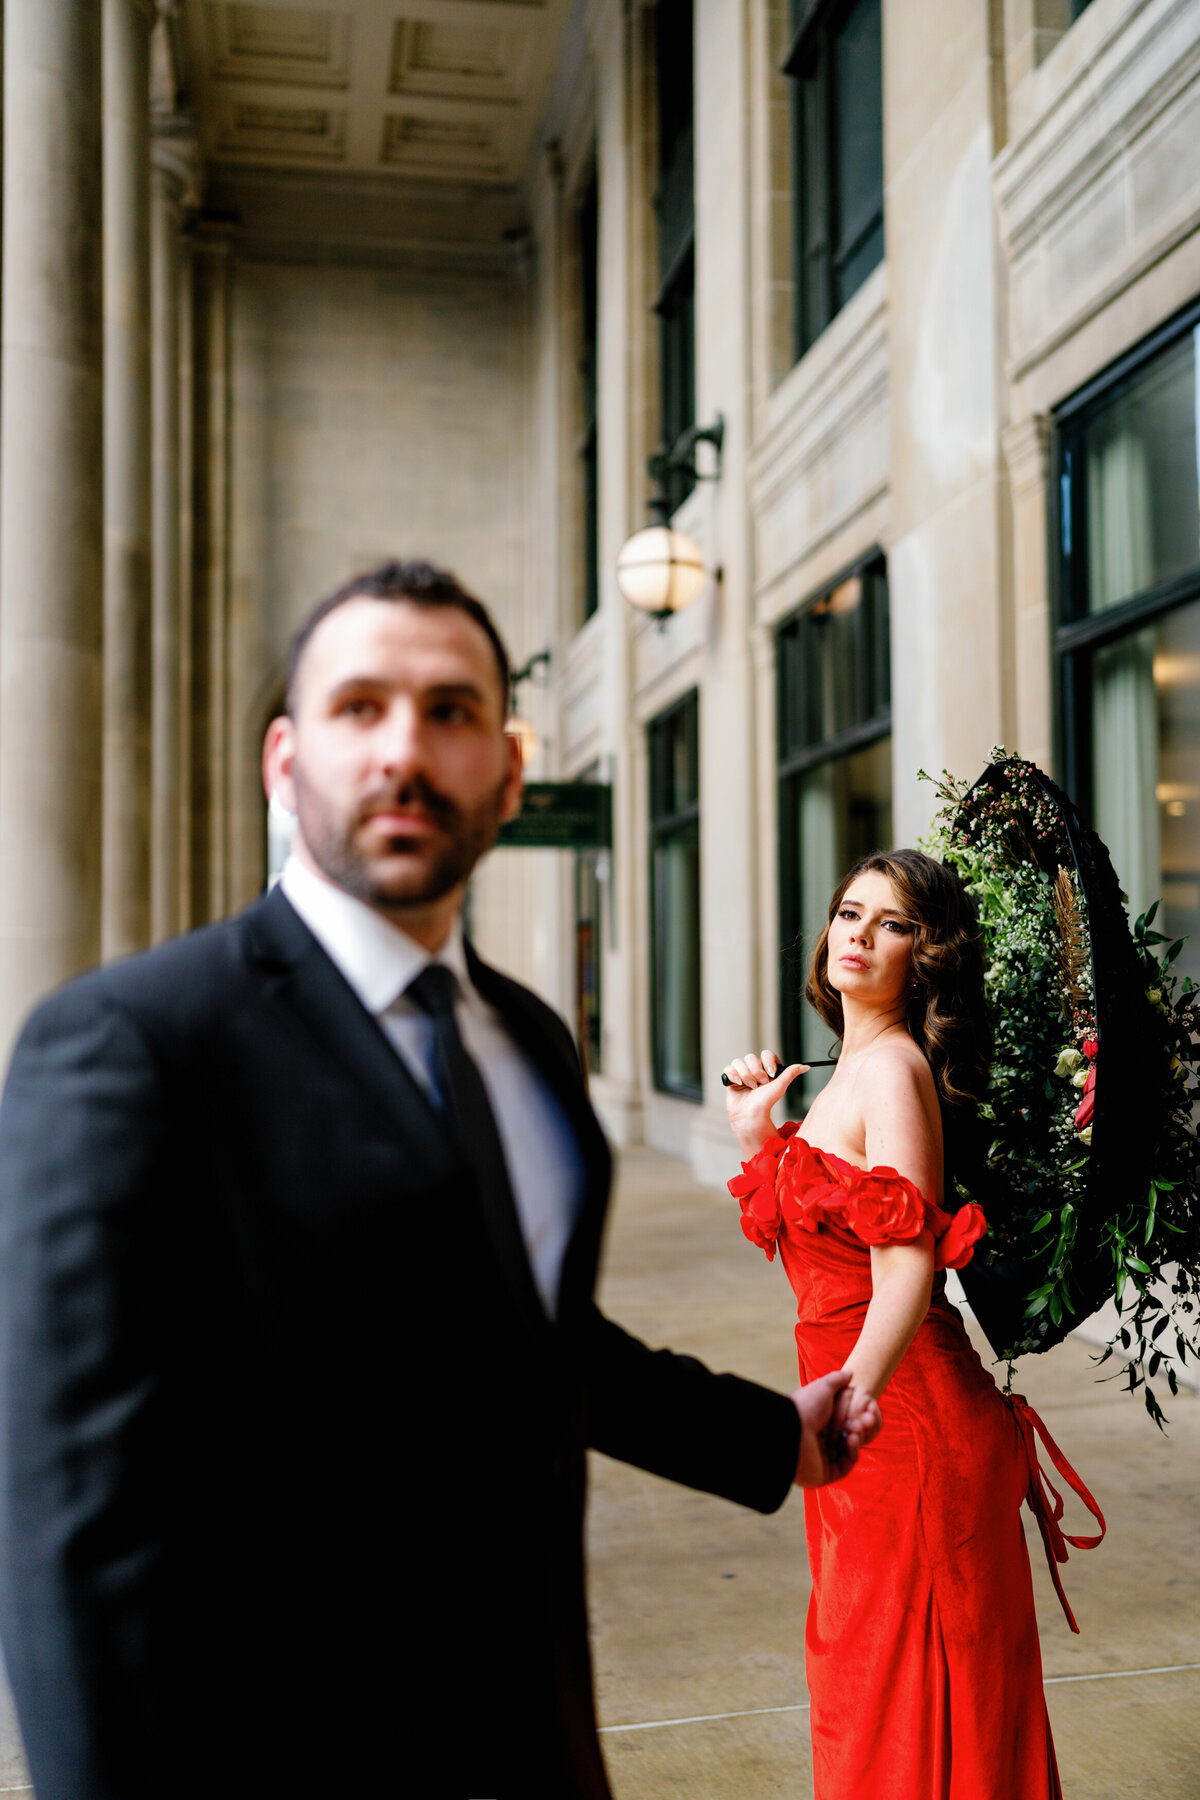 Aspen-Avenue-Chicago-Wedding-Photographer-Union-Station-Chicago-Theater-Engagement-Session-Timeless-Romantic-Red-Dress-Editorial-Stemming-From-Love-Bry-Jean-Artistry-The-Bridal-Collective-True-to-color-Luxury-FAV-45